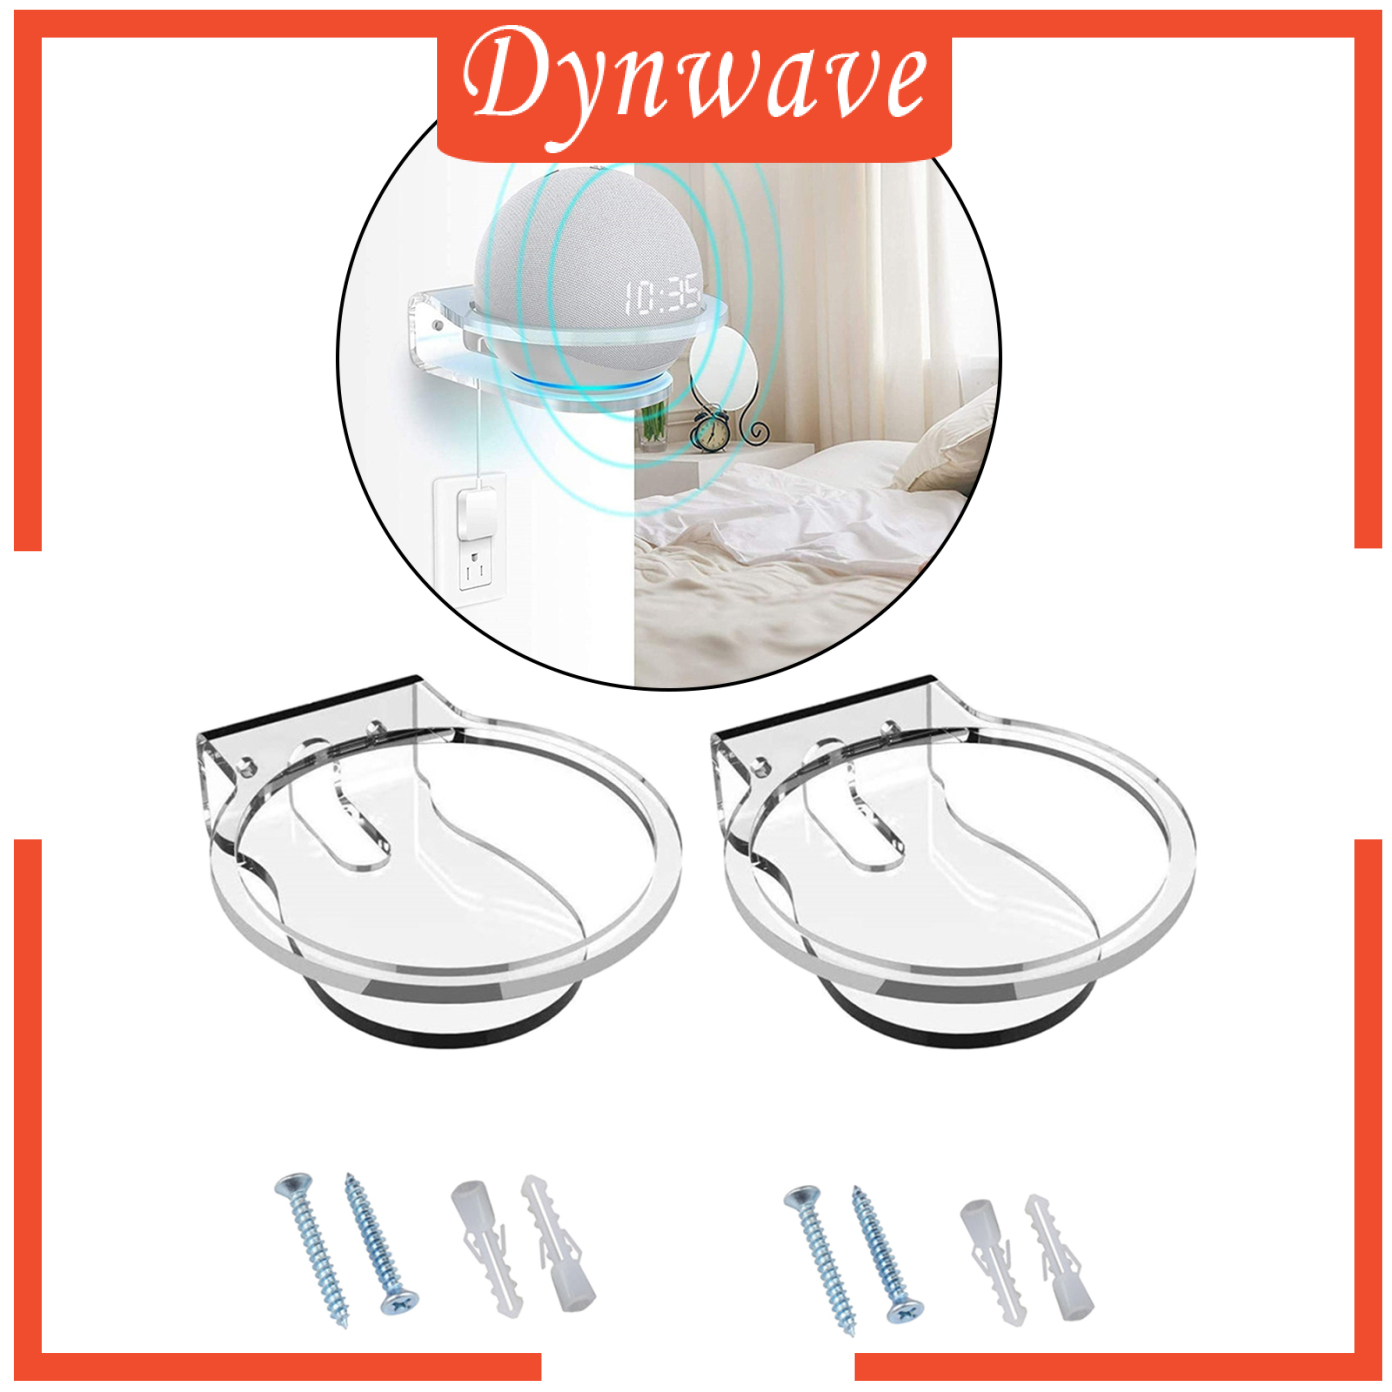 [DYNWAVE]Premium Clear Home Speaker Wall Mount Holder for Homepod Mini Wall Stand